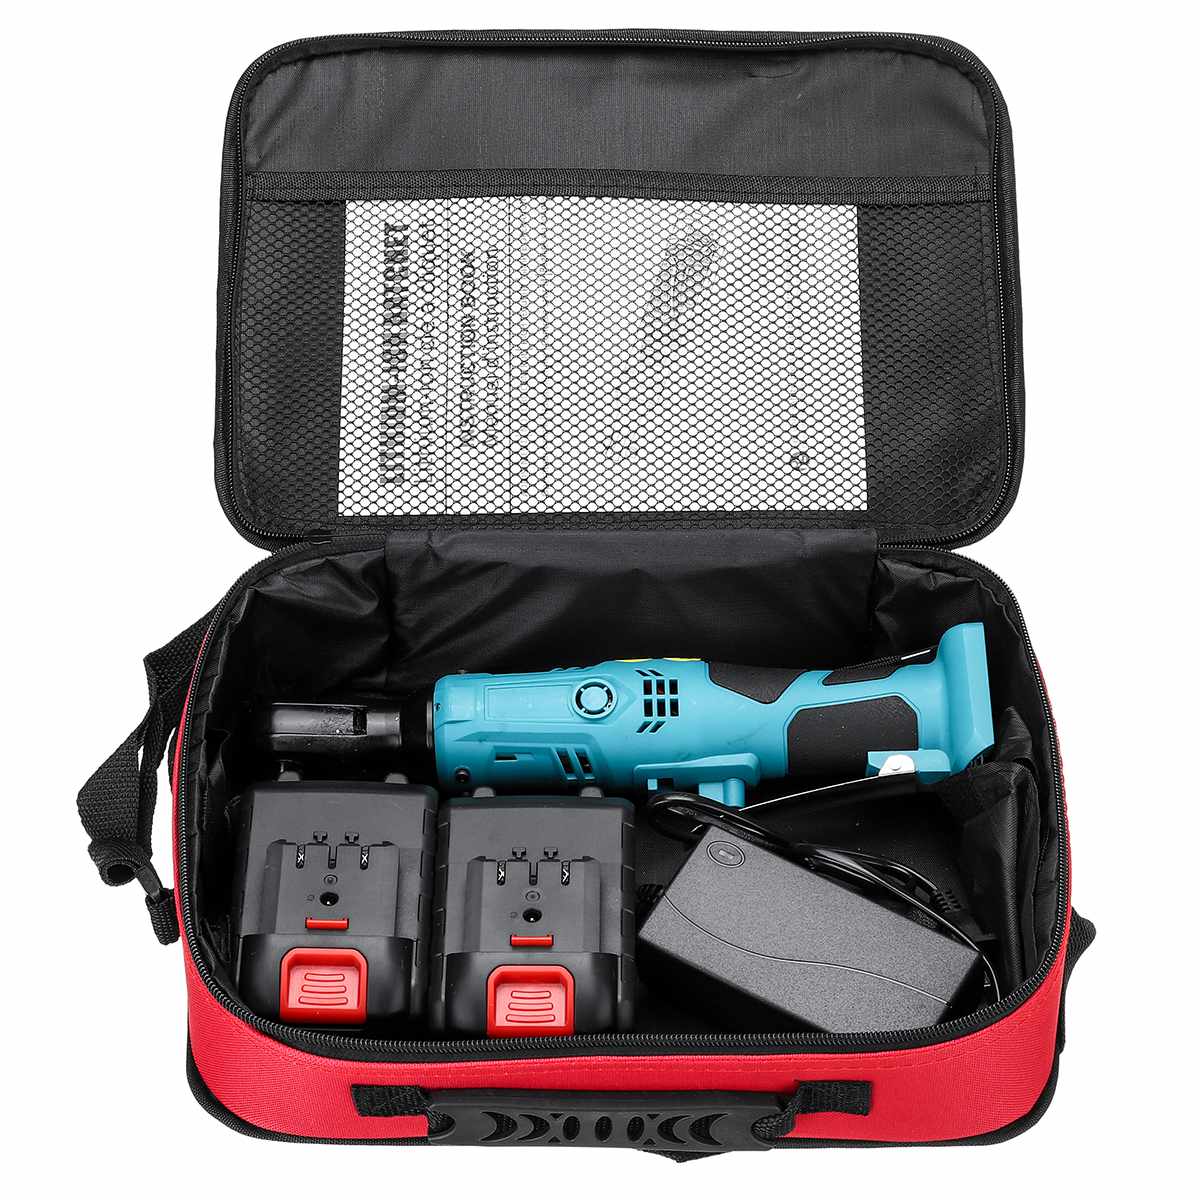 NEW 160N.m Cordless Electric Wrench 108V Ratchet Wrench Repair Tool Rechargeable Right Angle Wrench with 2 Battery Charger Kit